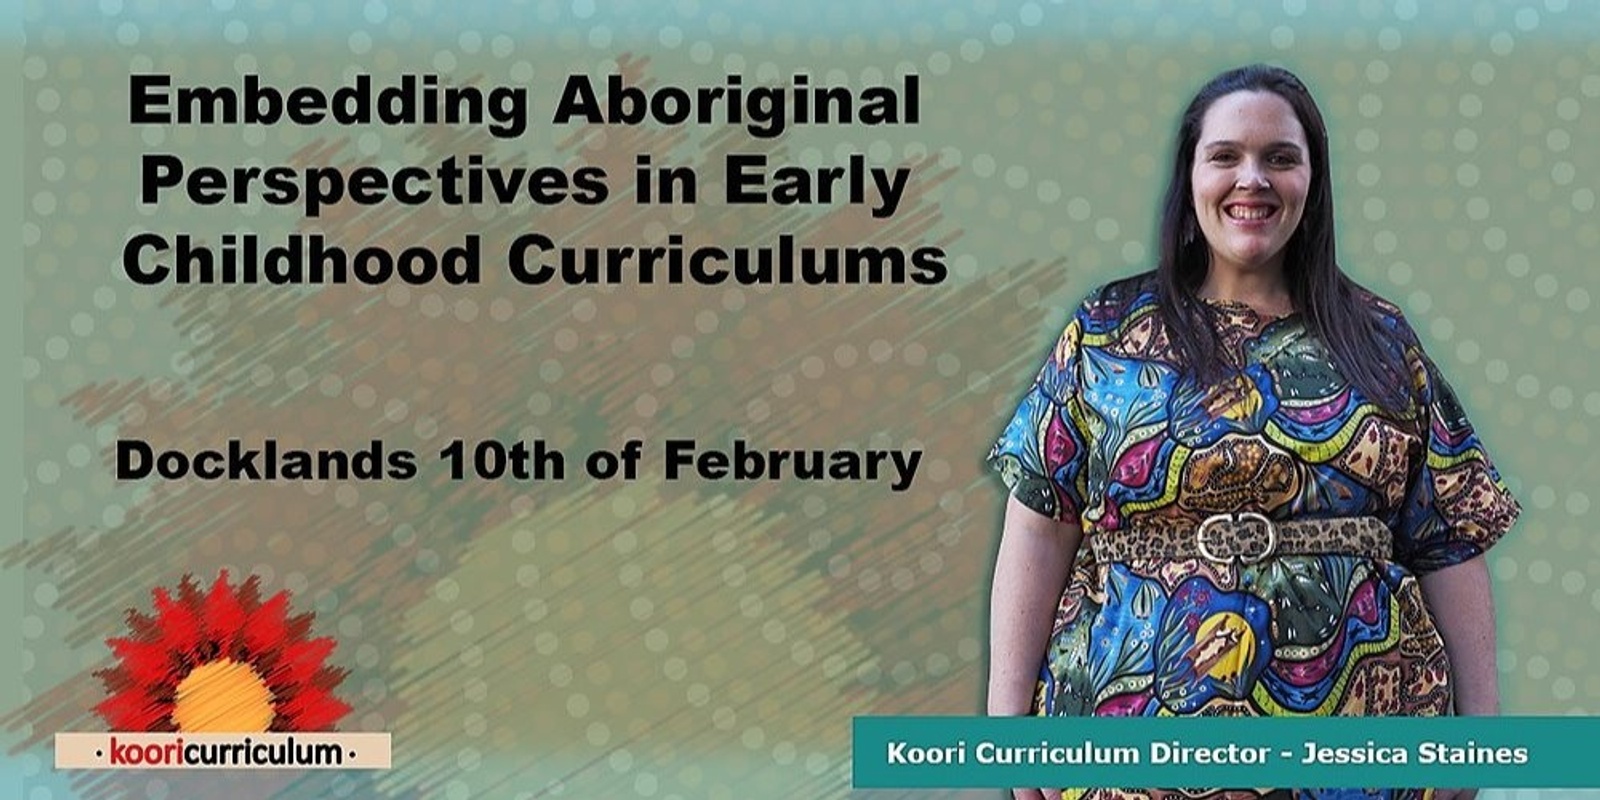 Banner image for Docklands - Embedding Aboriginal Perspectives in Early Childhood